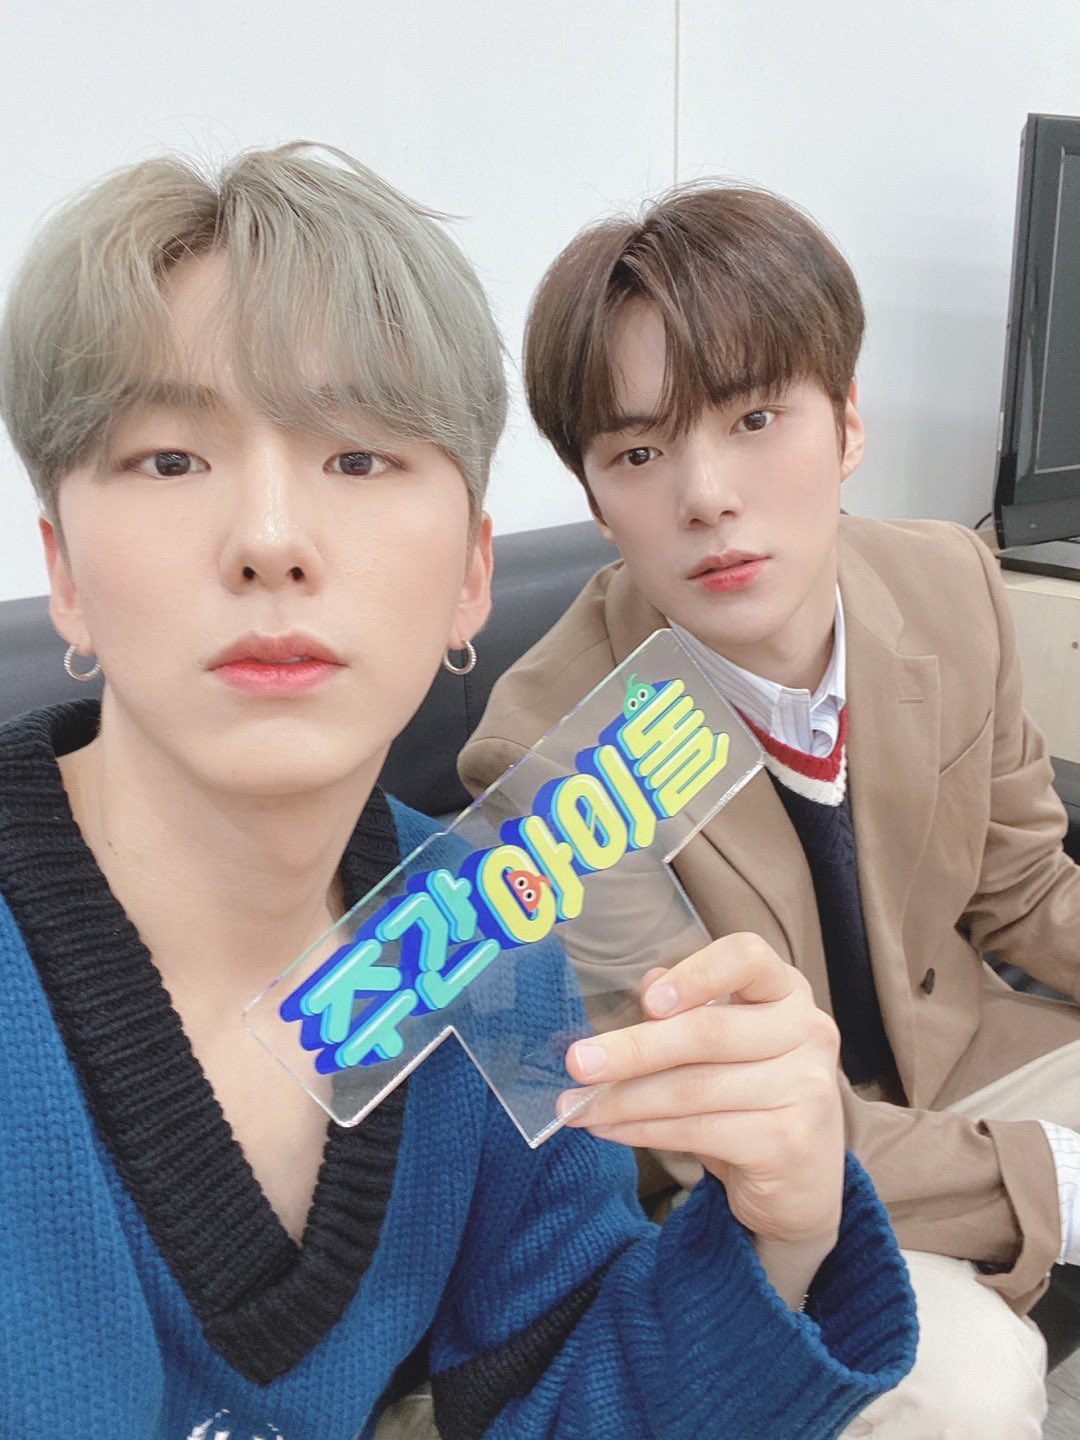 monsta-x-kihyun-and-minhyuk-to-be-mc-for-the-oneus-episode-of-weekly-idol-1